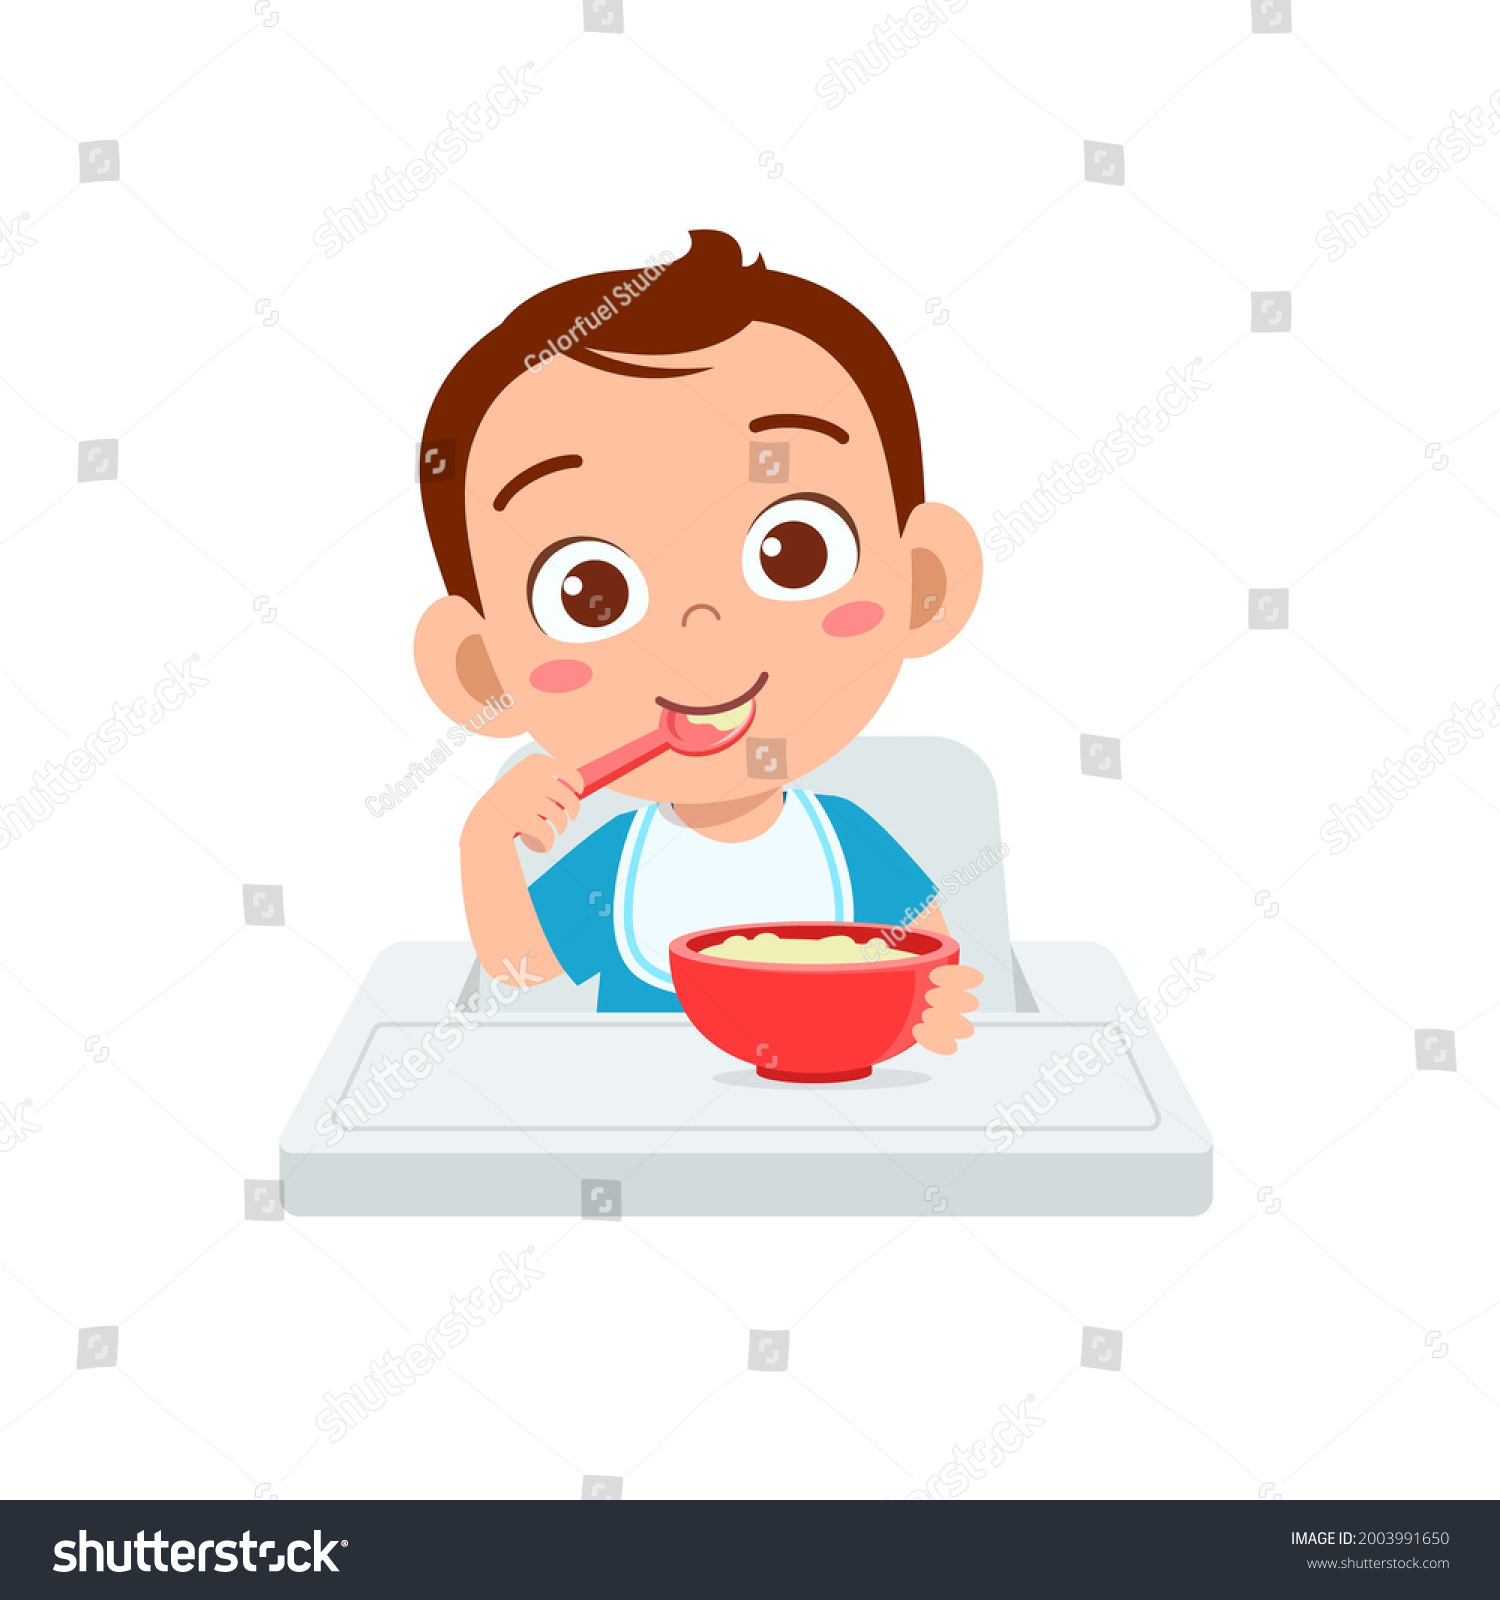 SVG of cute little baby boy eat porridge in bowl with spoon svg